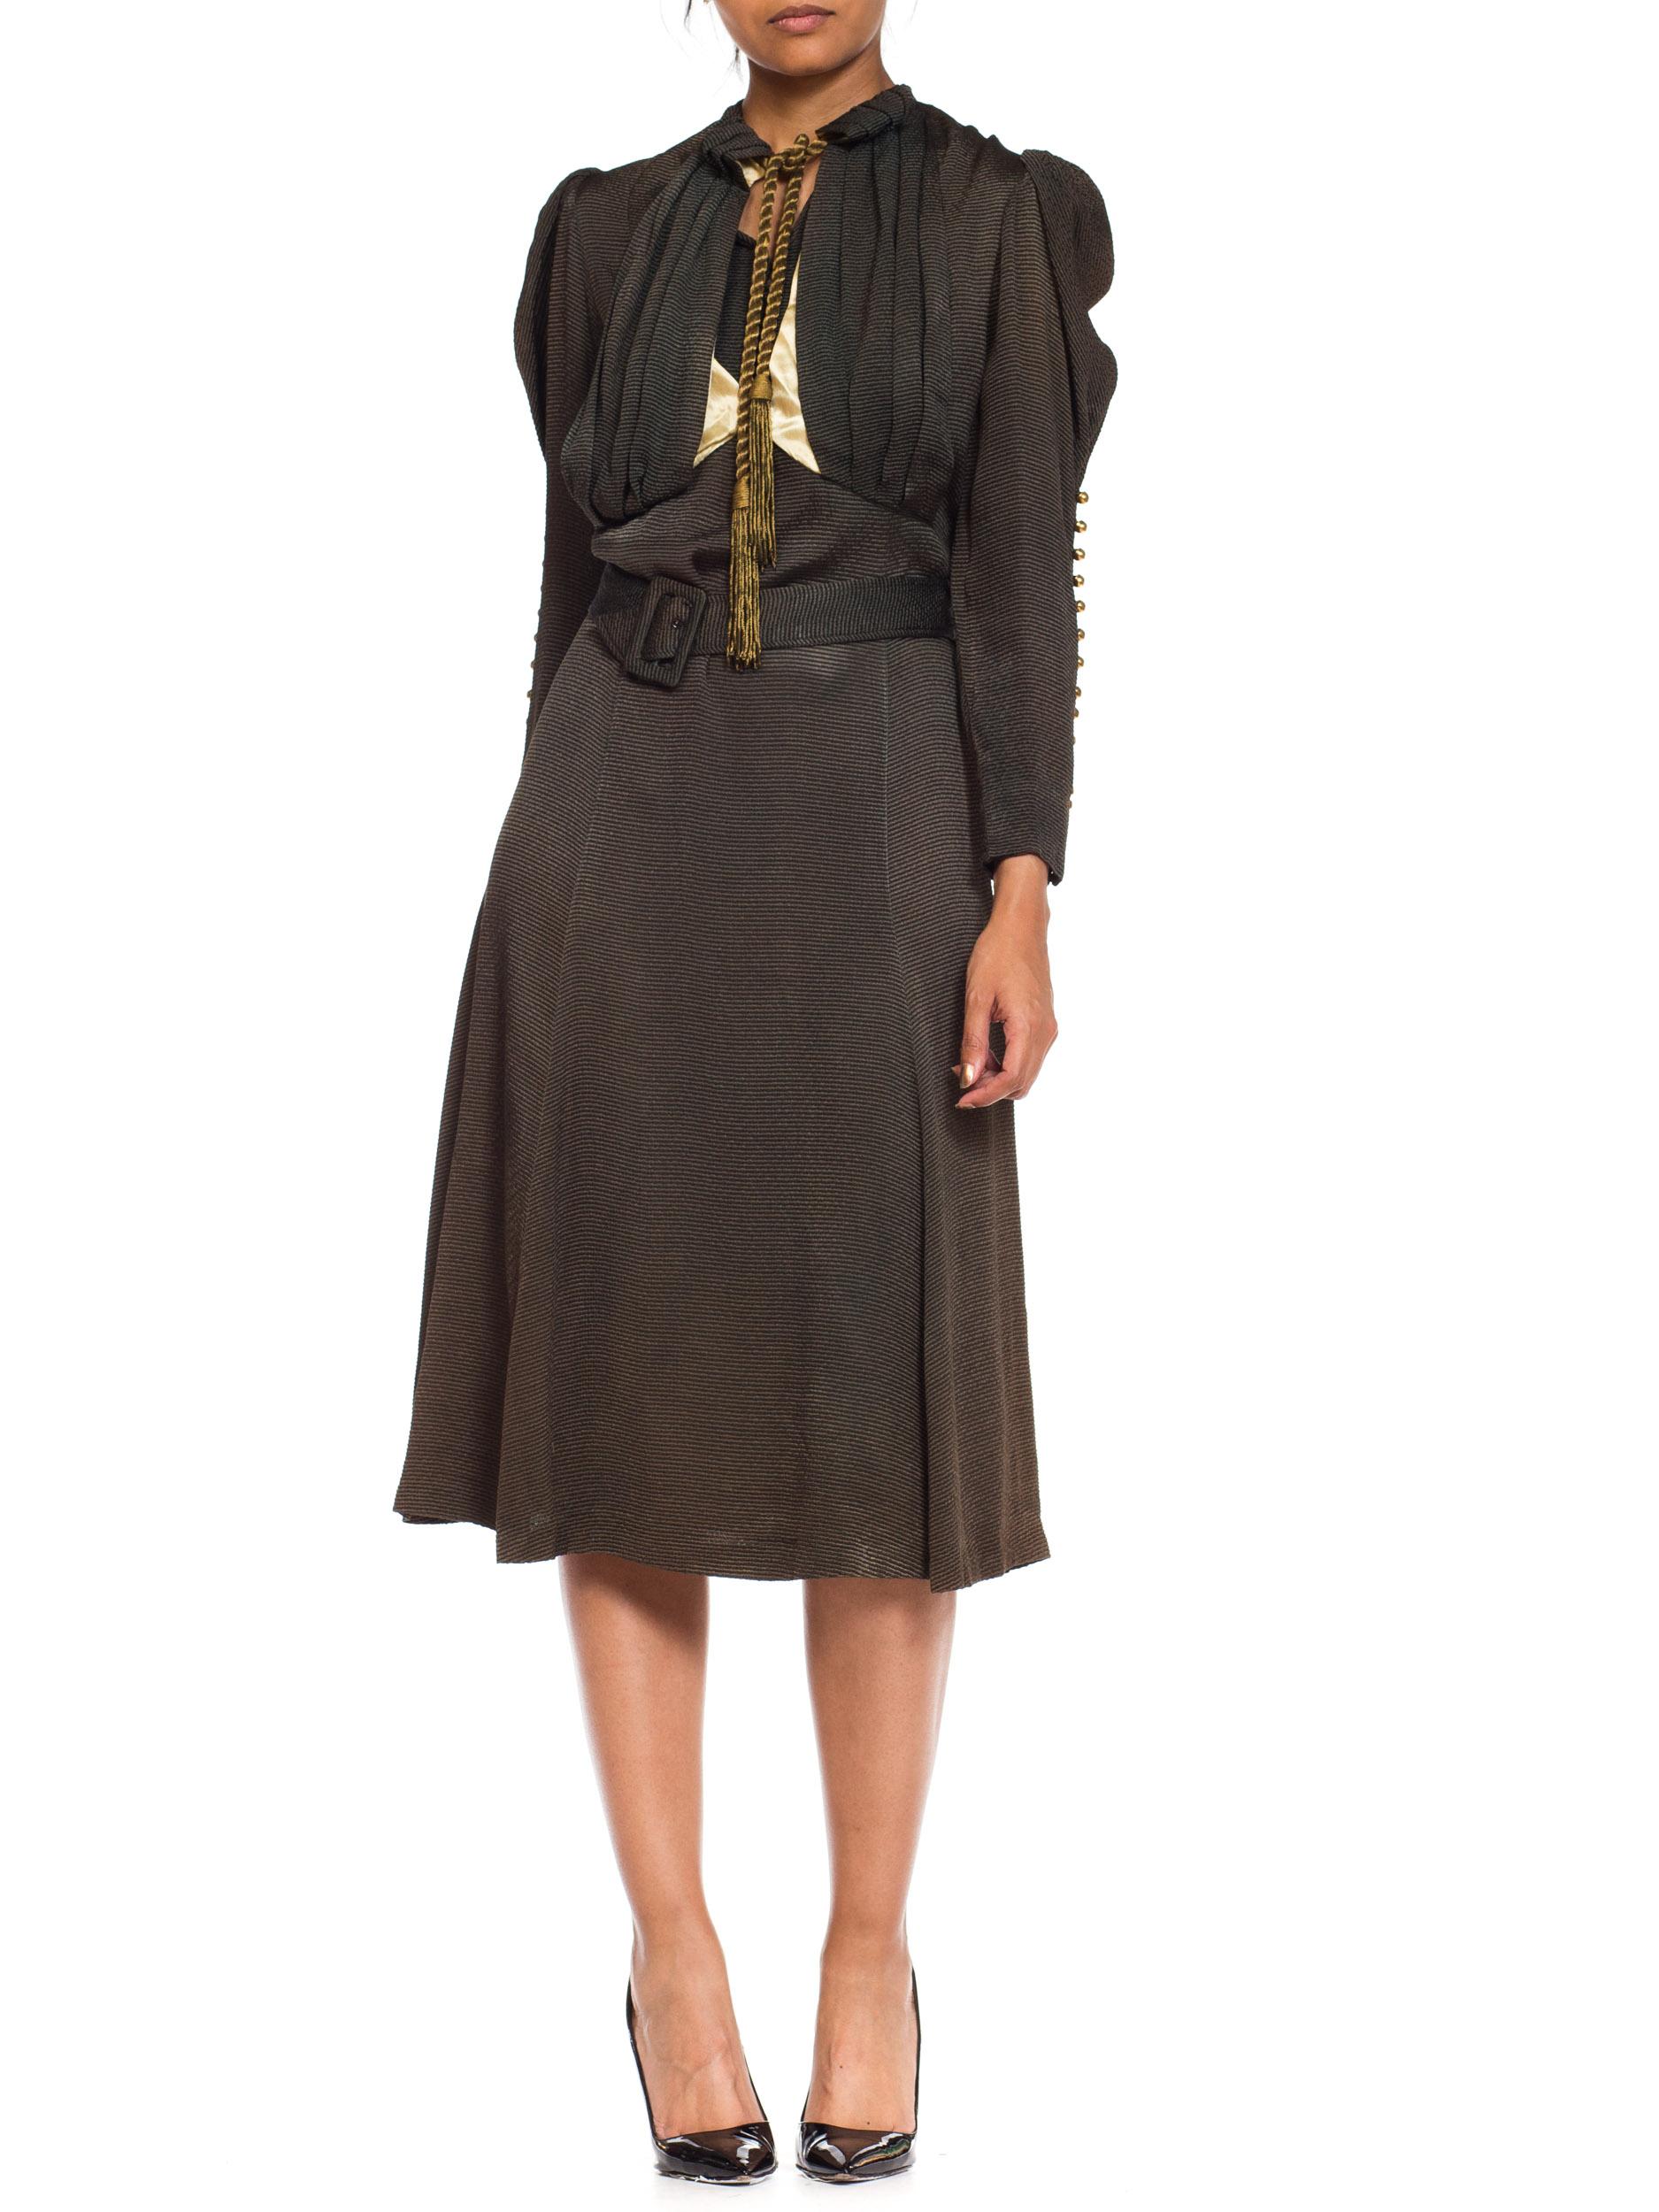 1930s Olive Green Textured Mutton Sleeve Dress 2